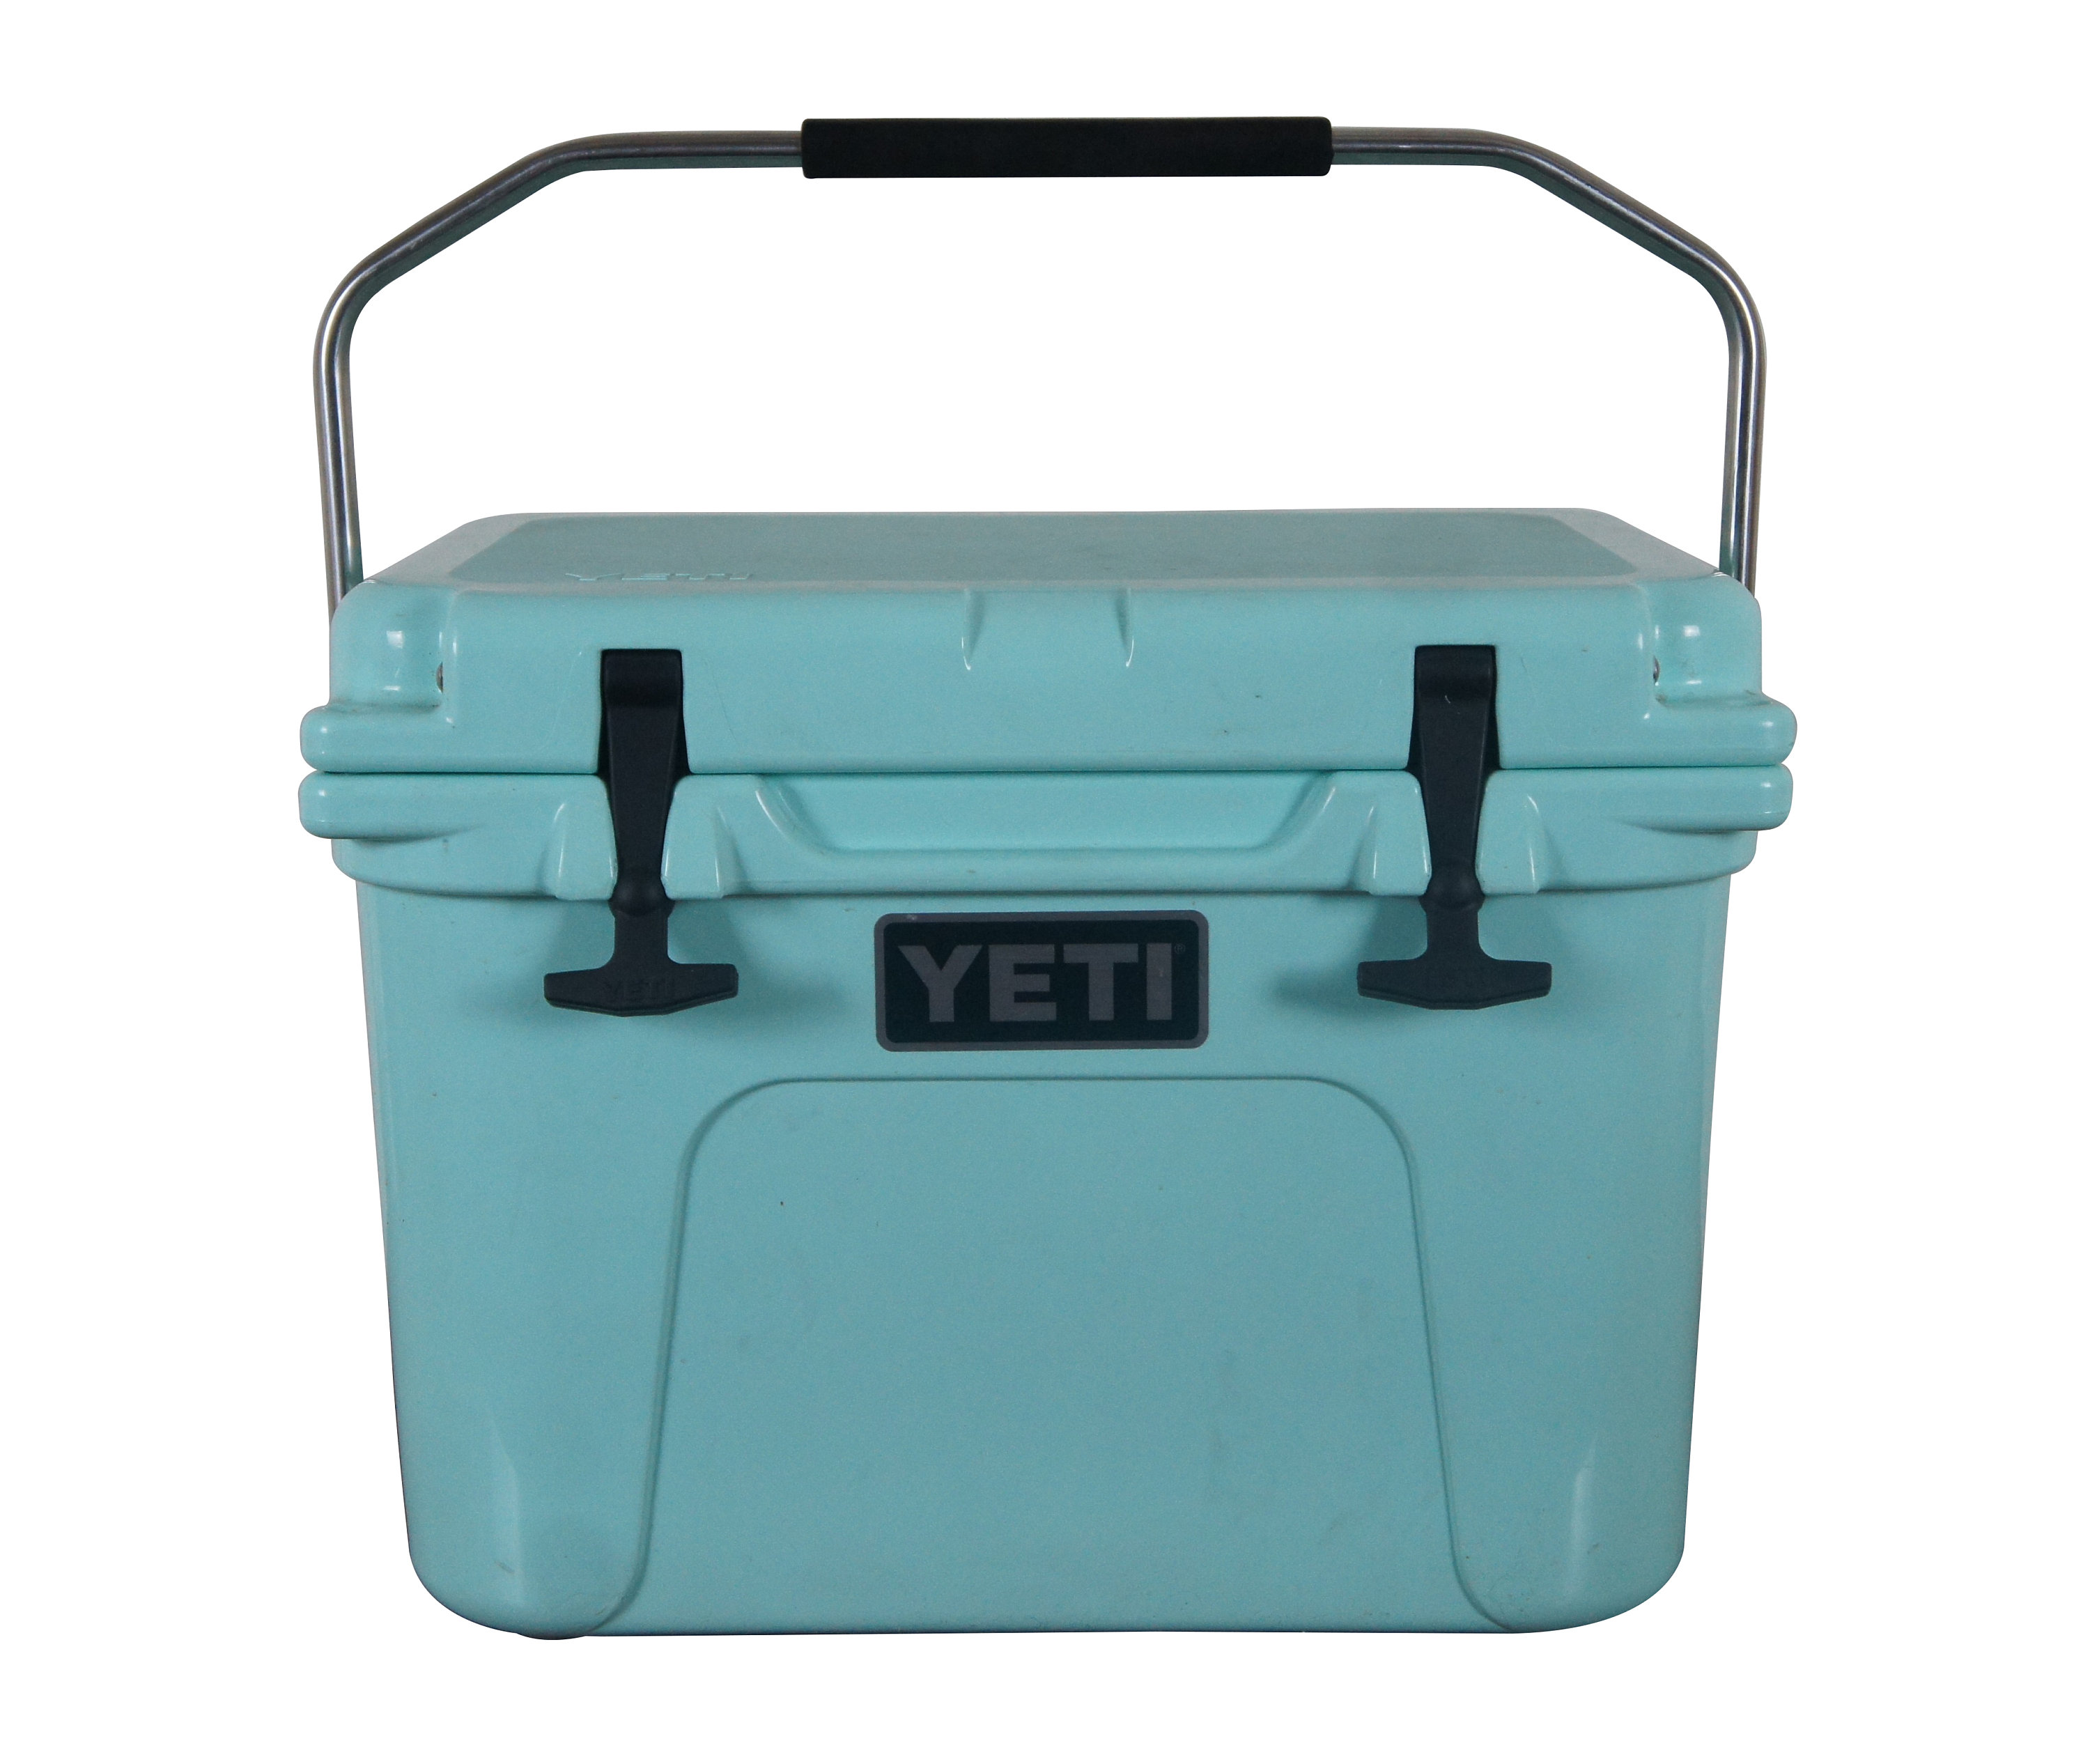 Pink yeti cooler • Compare & find best prices today »